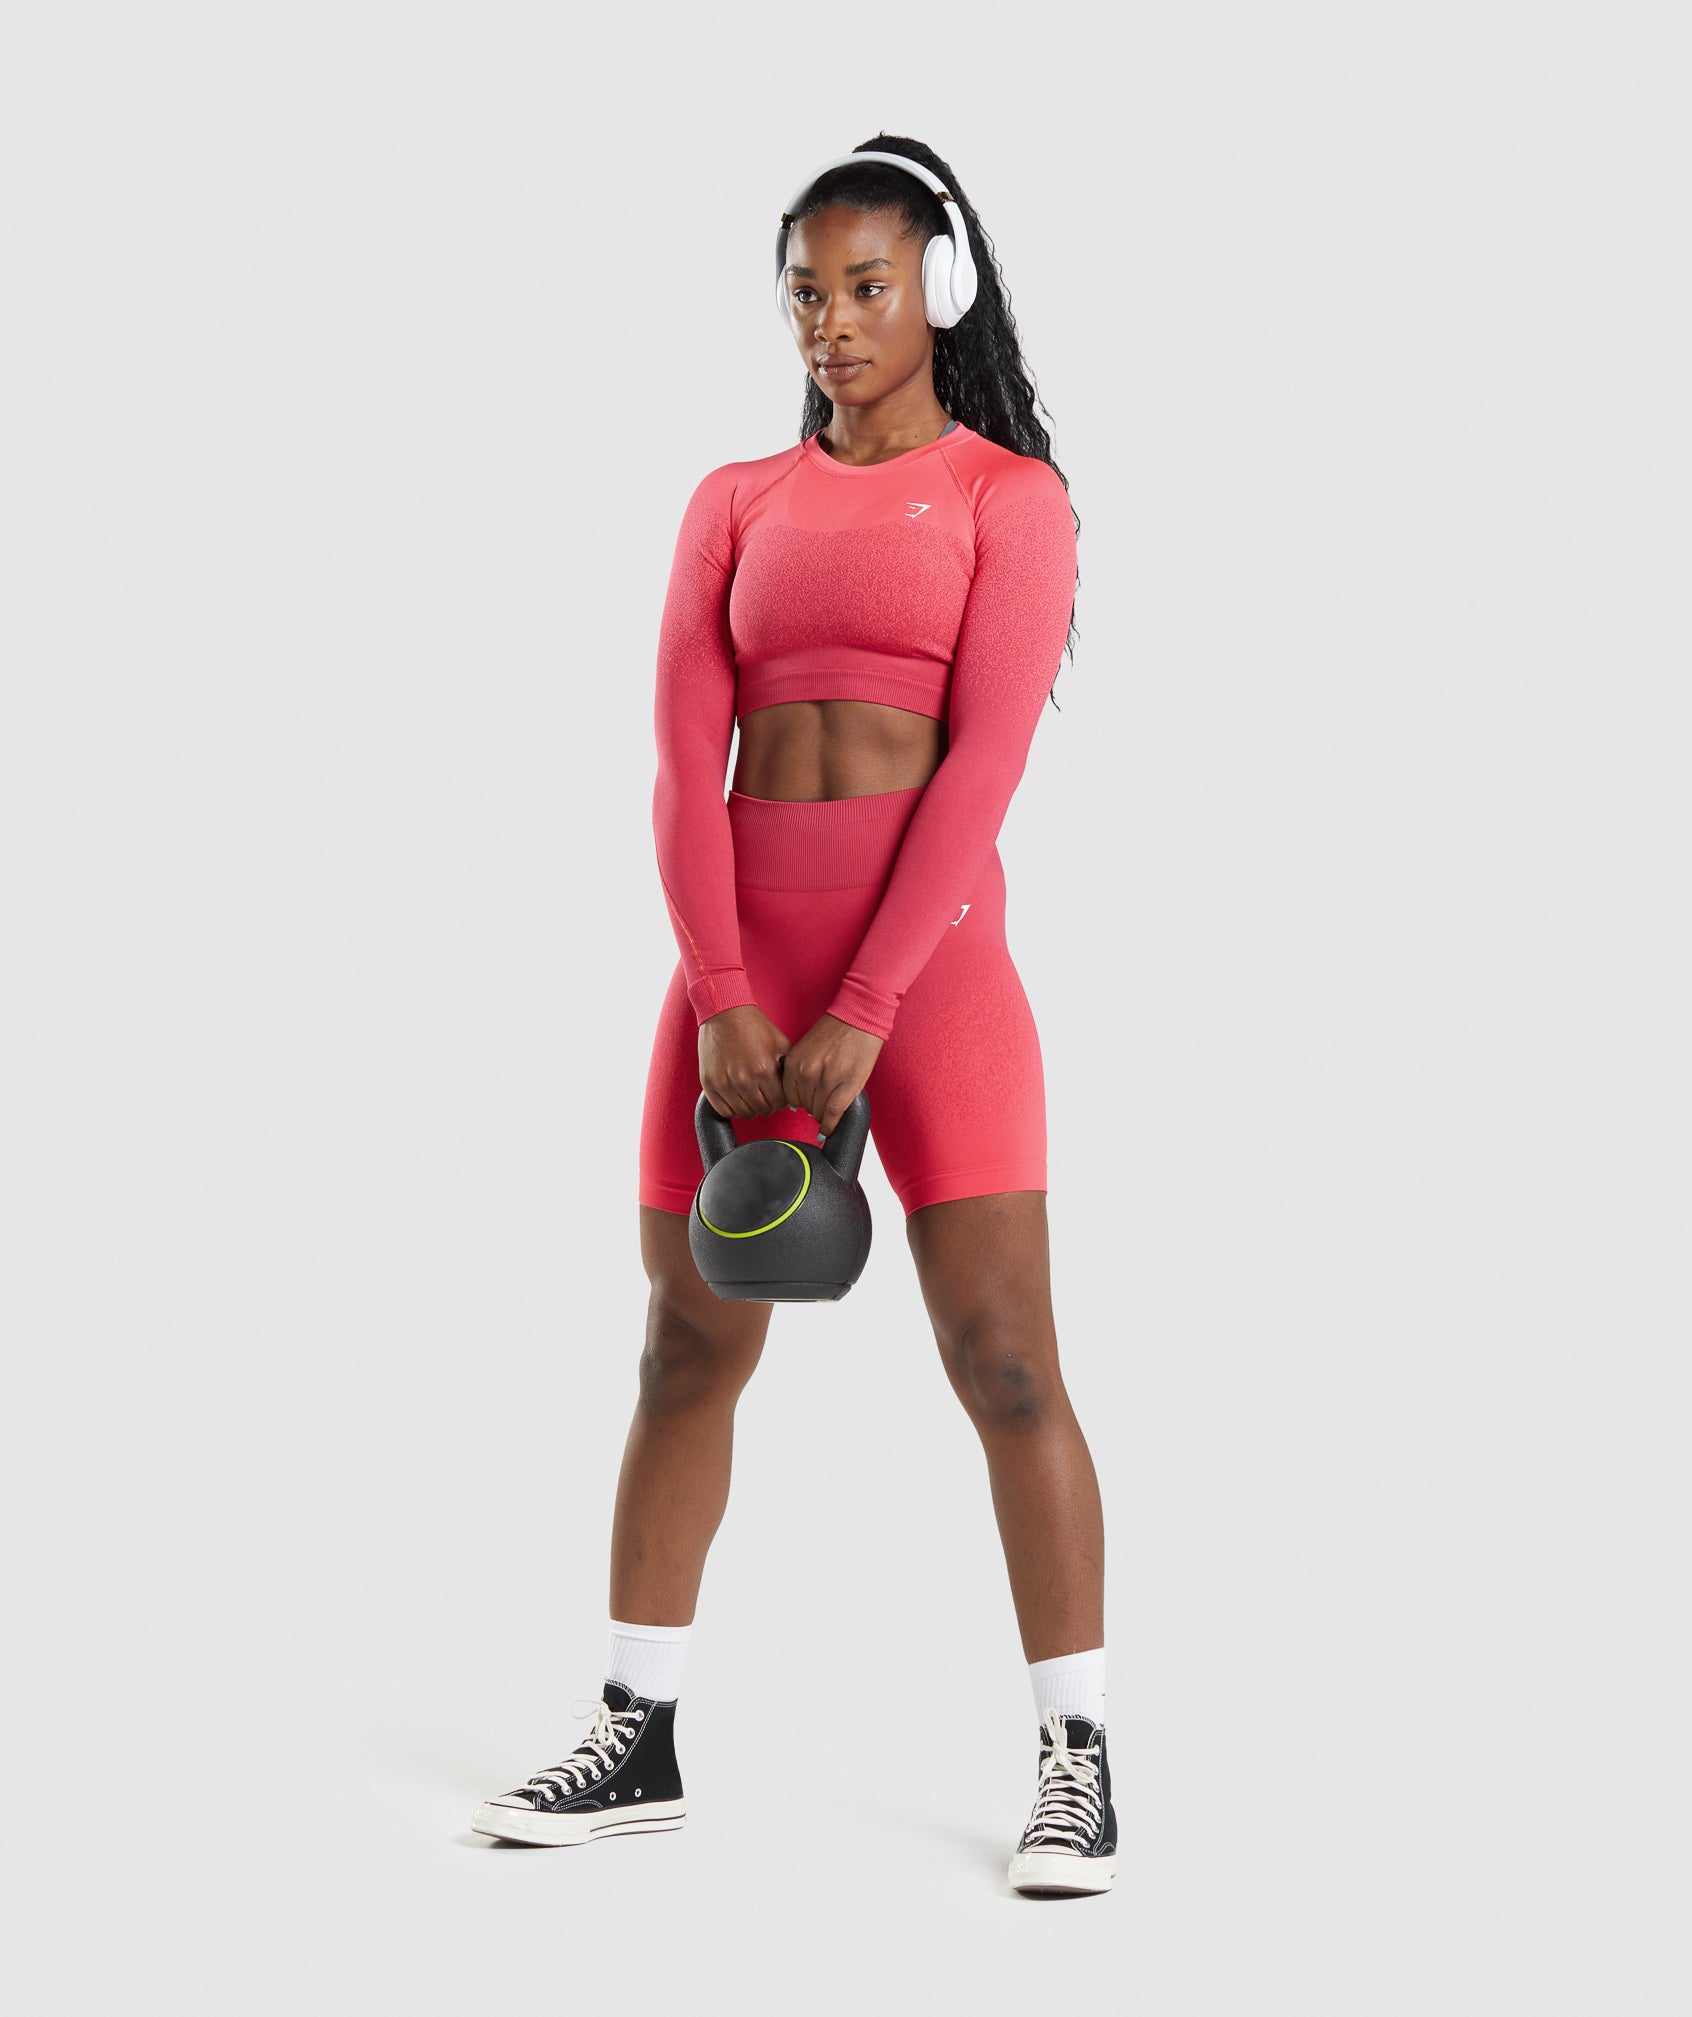 The Gymshark Ombre Seamless Crop Top is perfect for both cardio